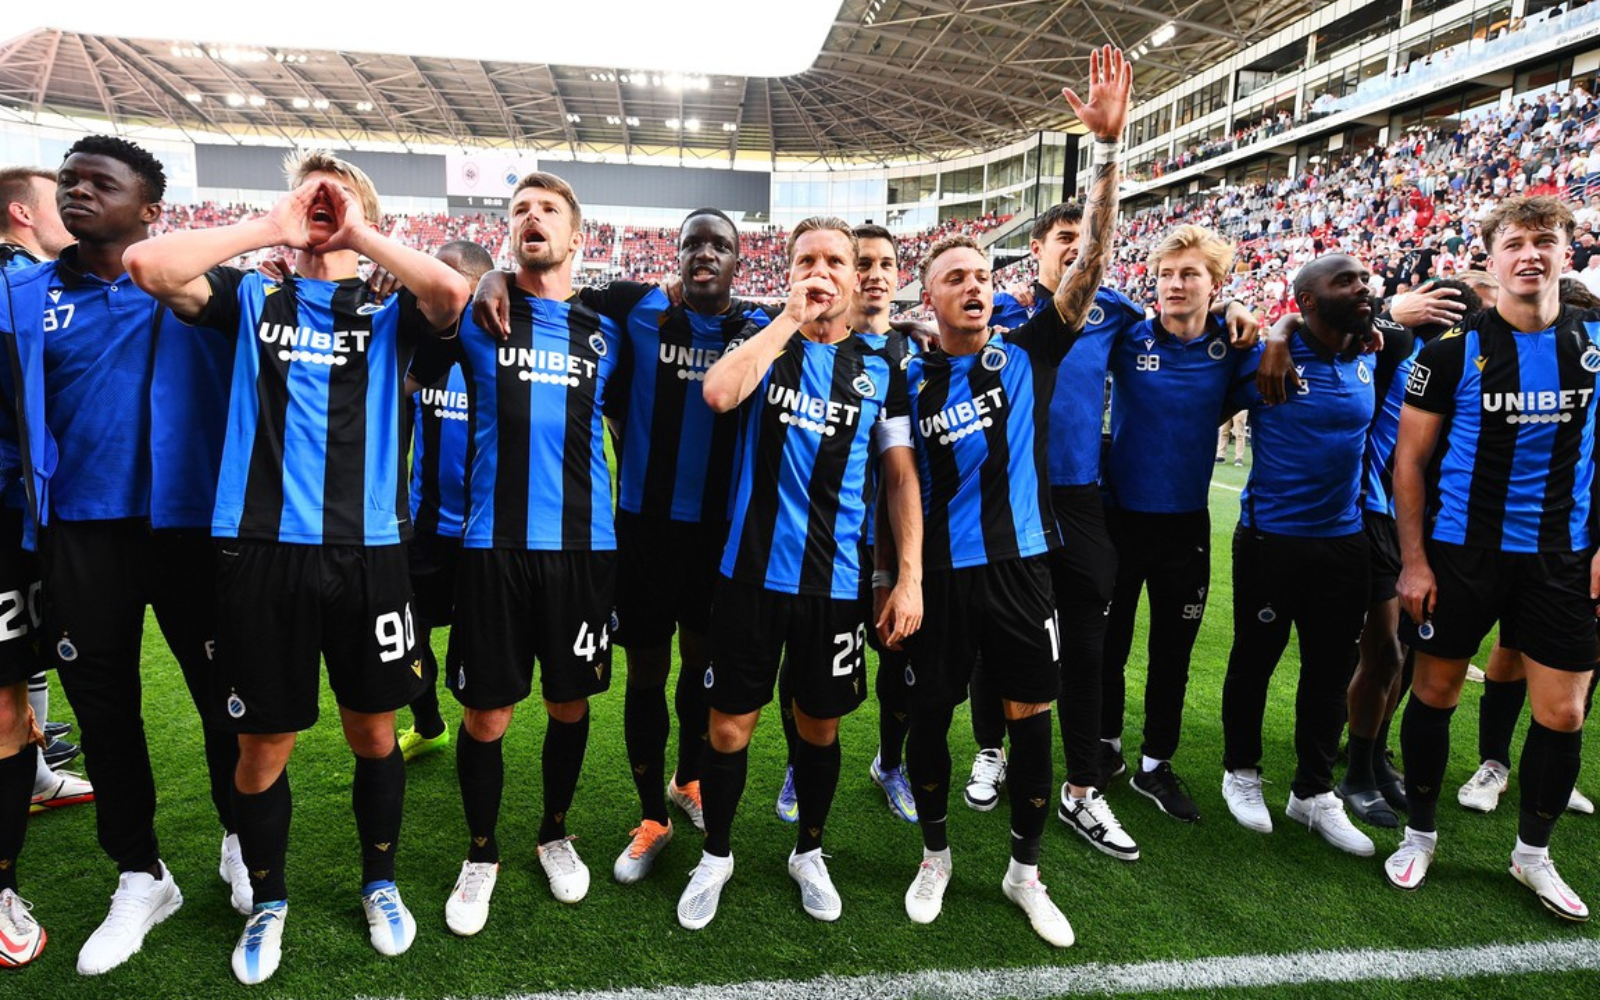 Milan planning summer coup for Club Brugge's Lang - Football Italia